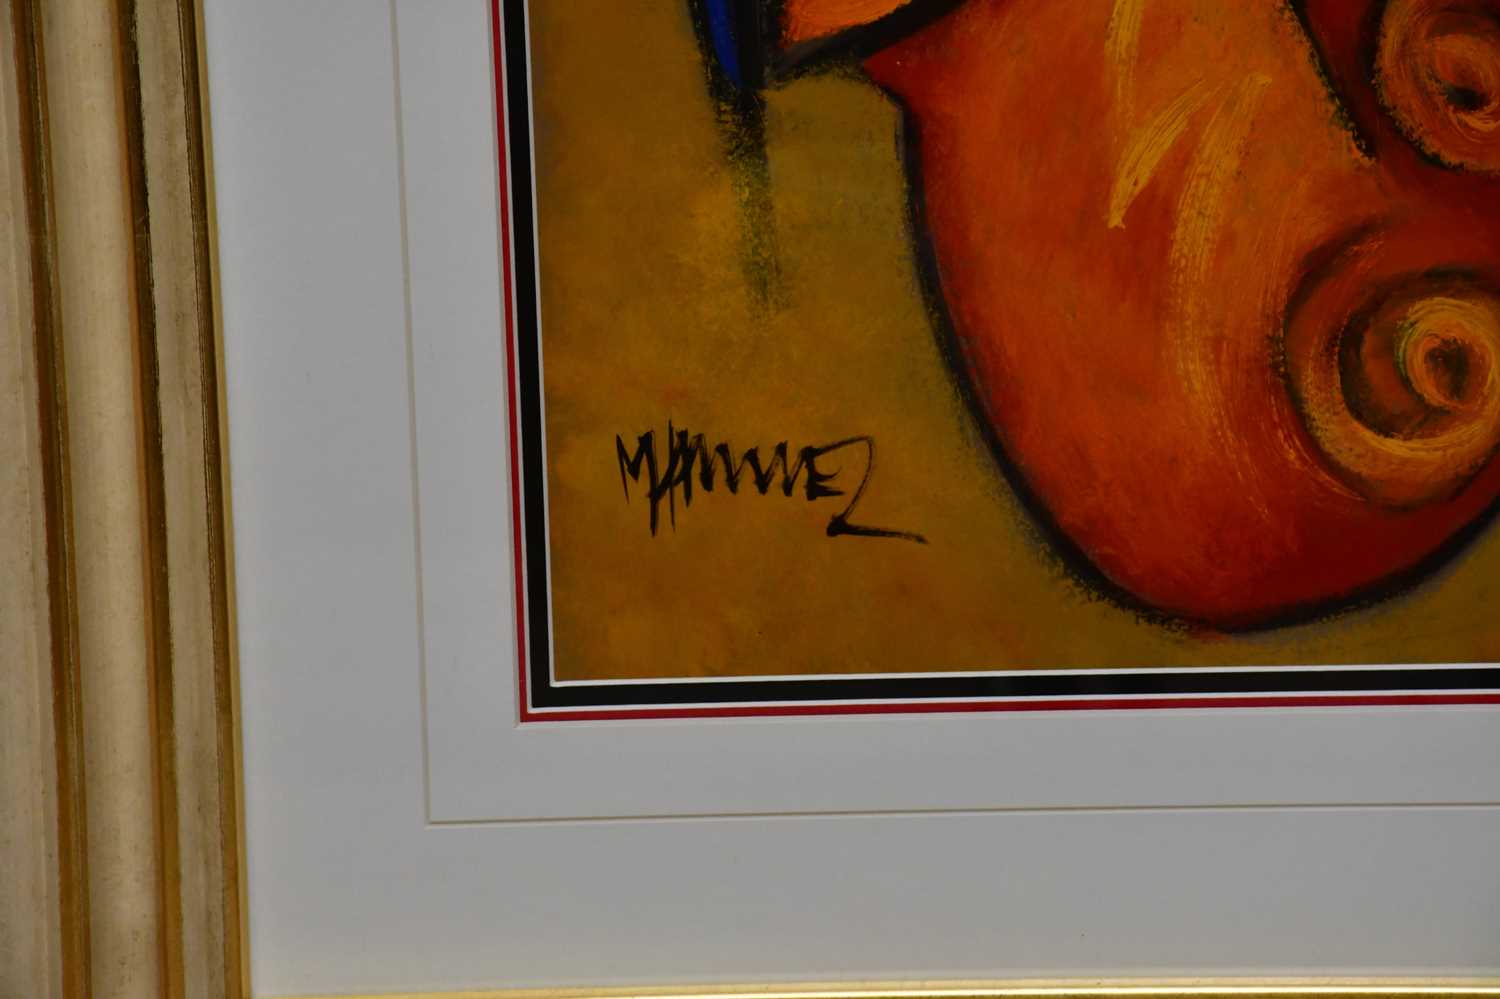 MARSHA HAMMEL; oil on gesso, 'In The Groove, 1937 - Mary Lou Williams & Sax', 90 x 60cm, framed - Image 3 of 5